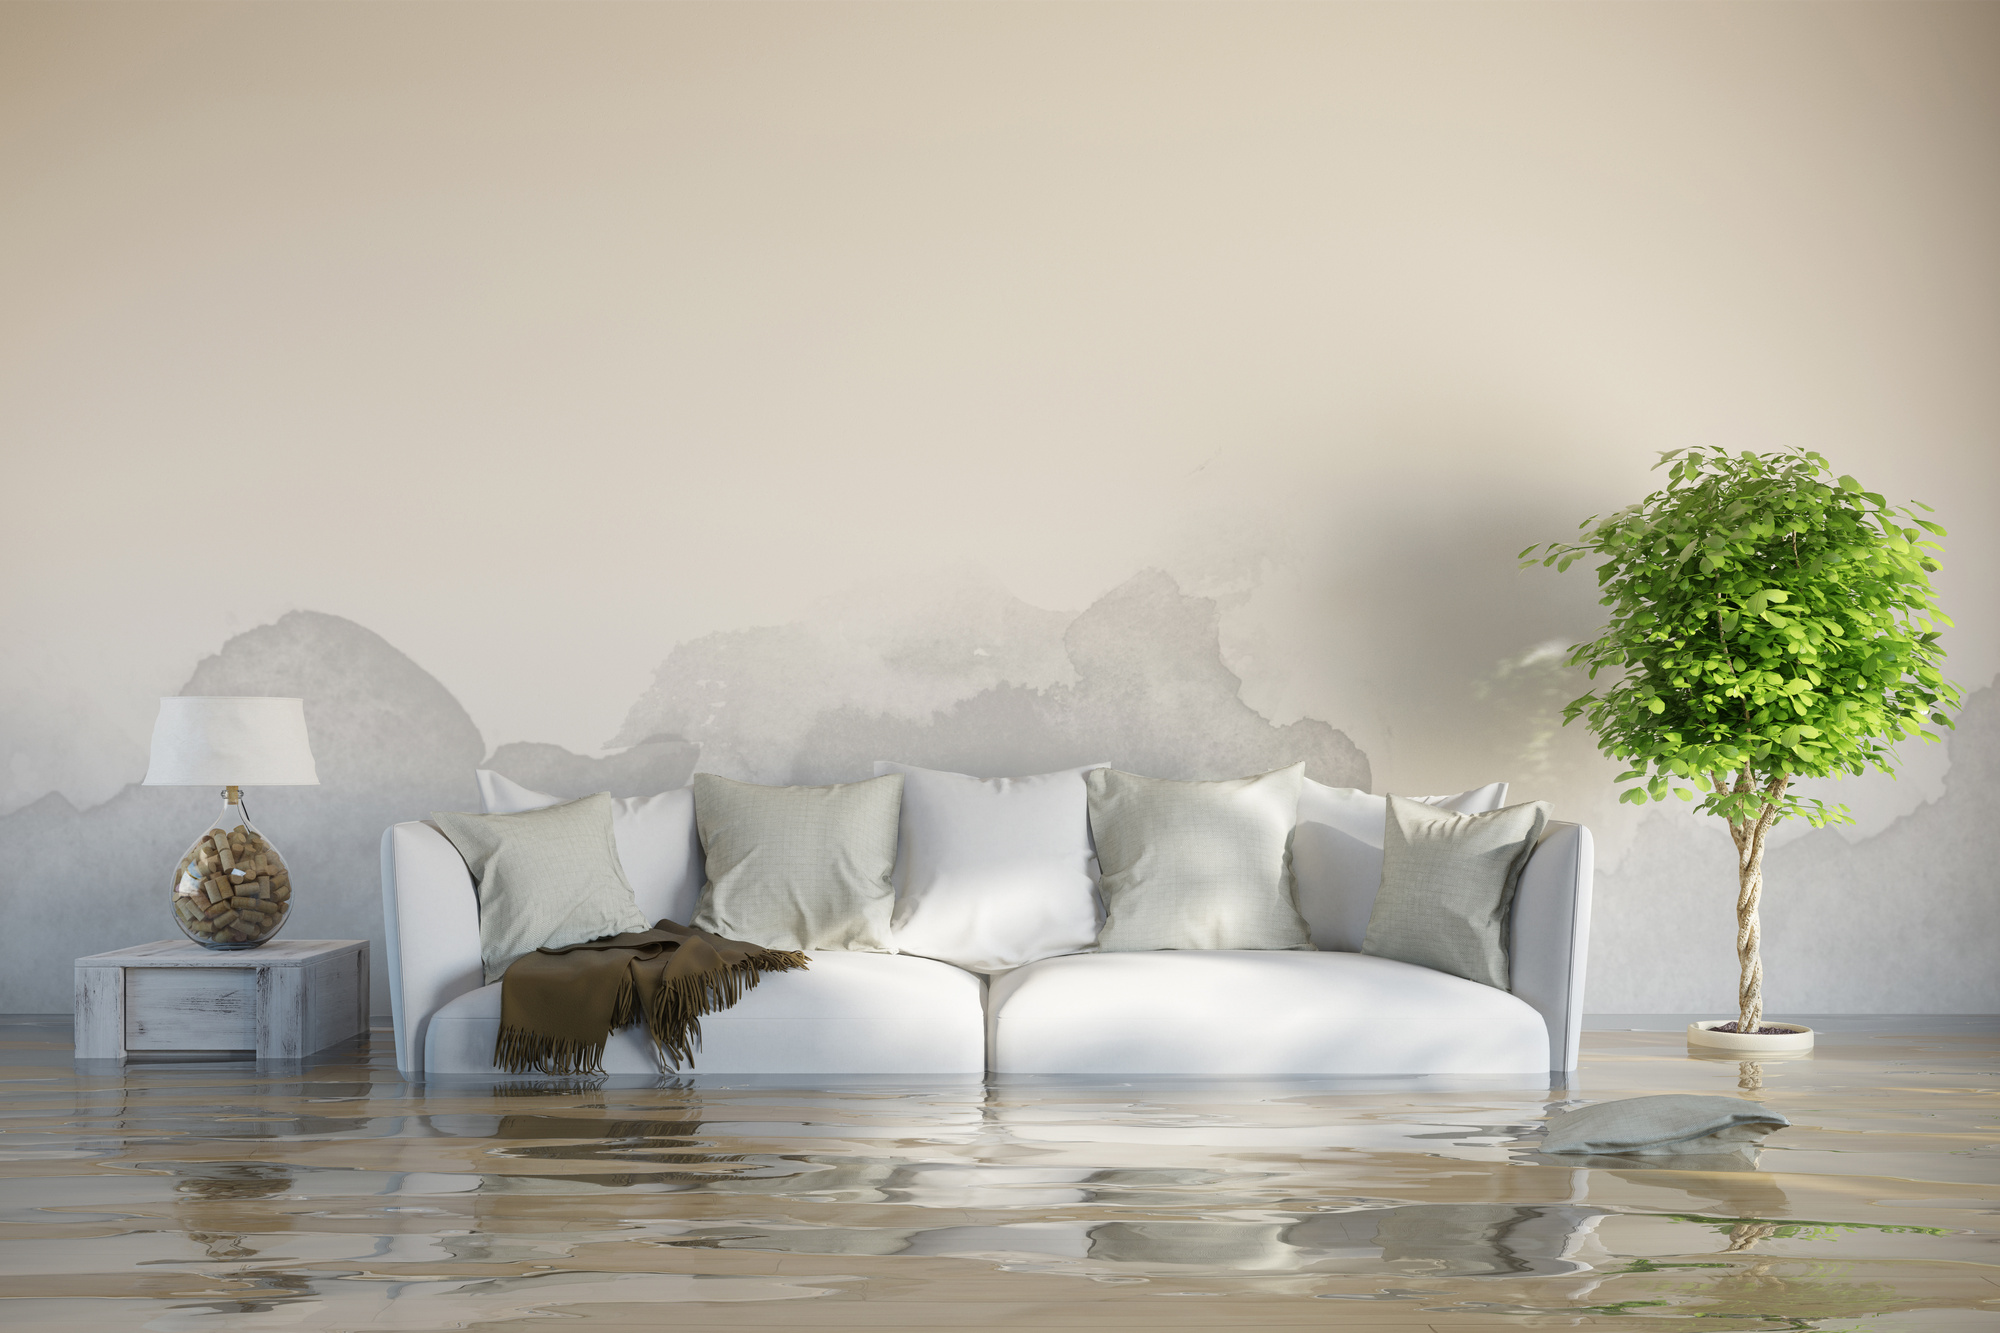 Water Damage vs Mold: What Are the Differences?